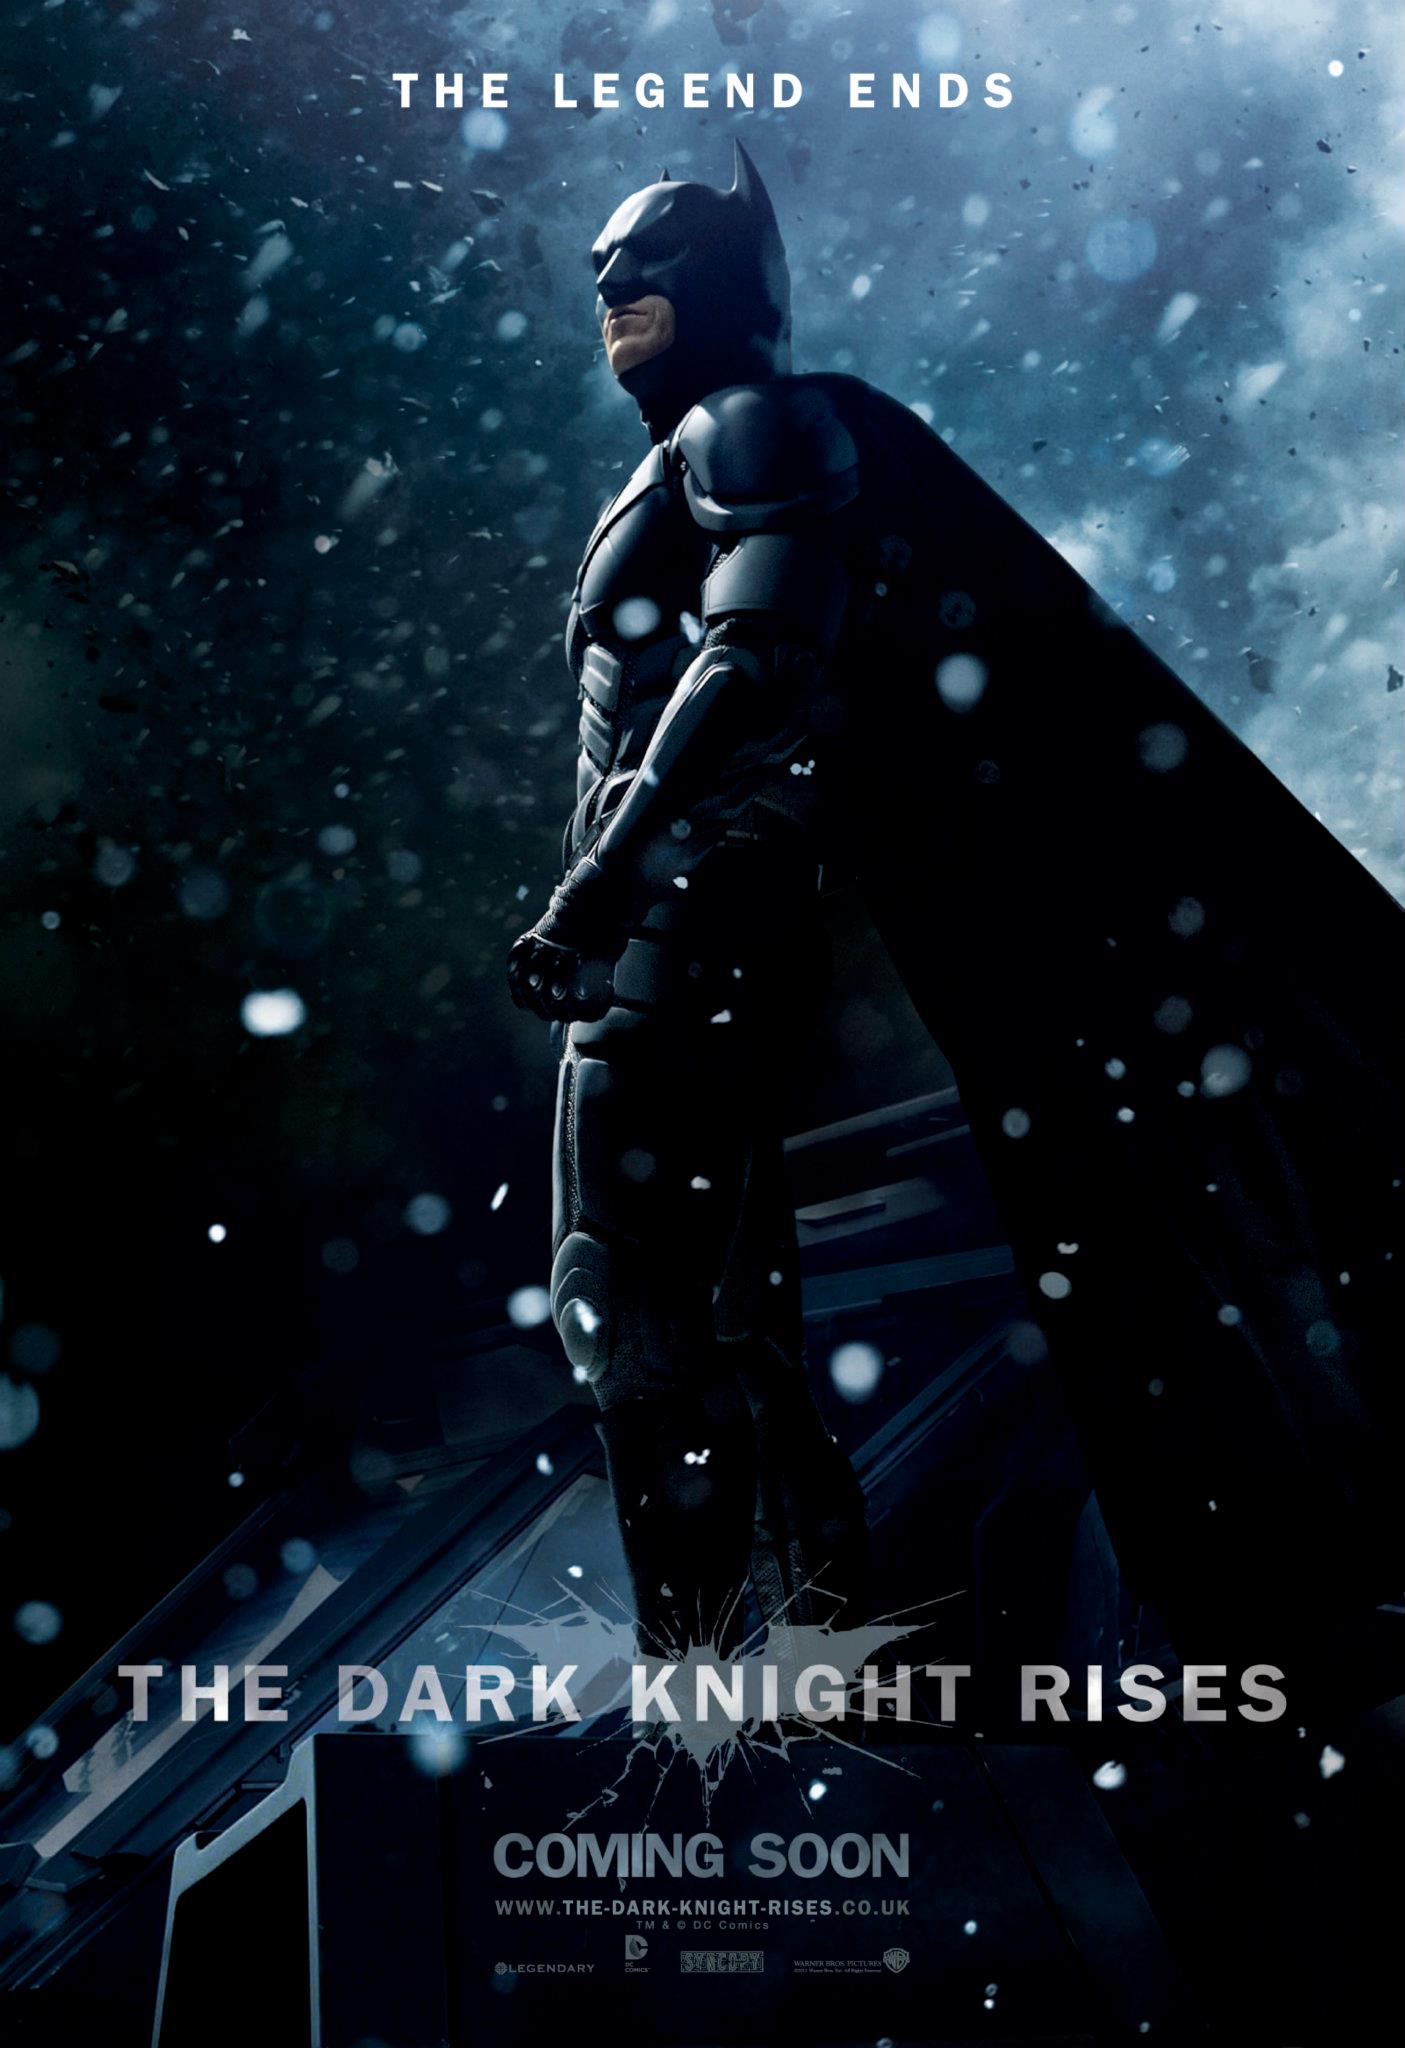 The Dark Knight Rises Bane US Character Poster